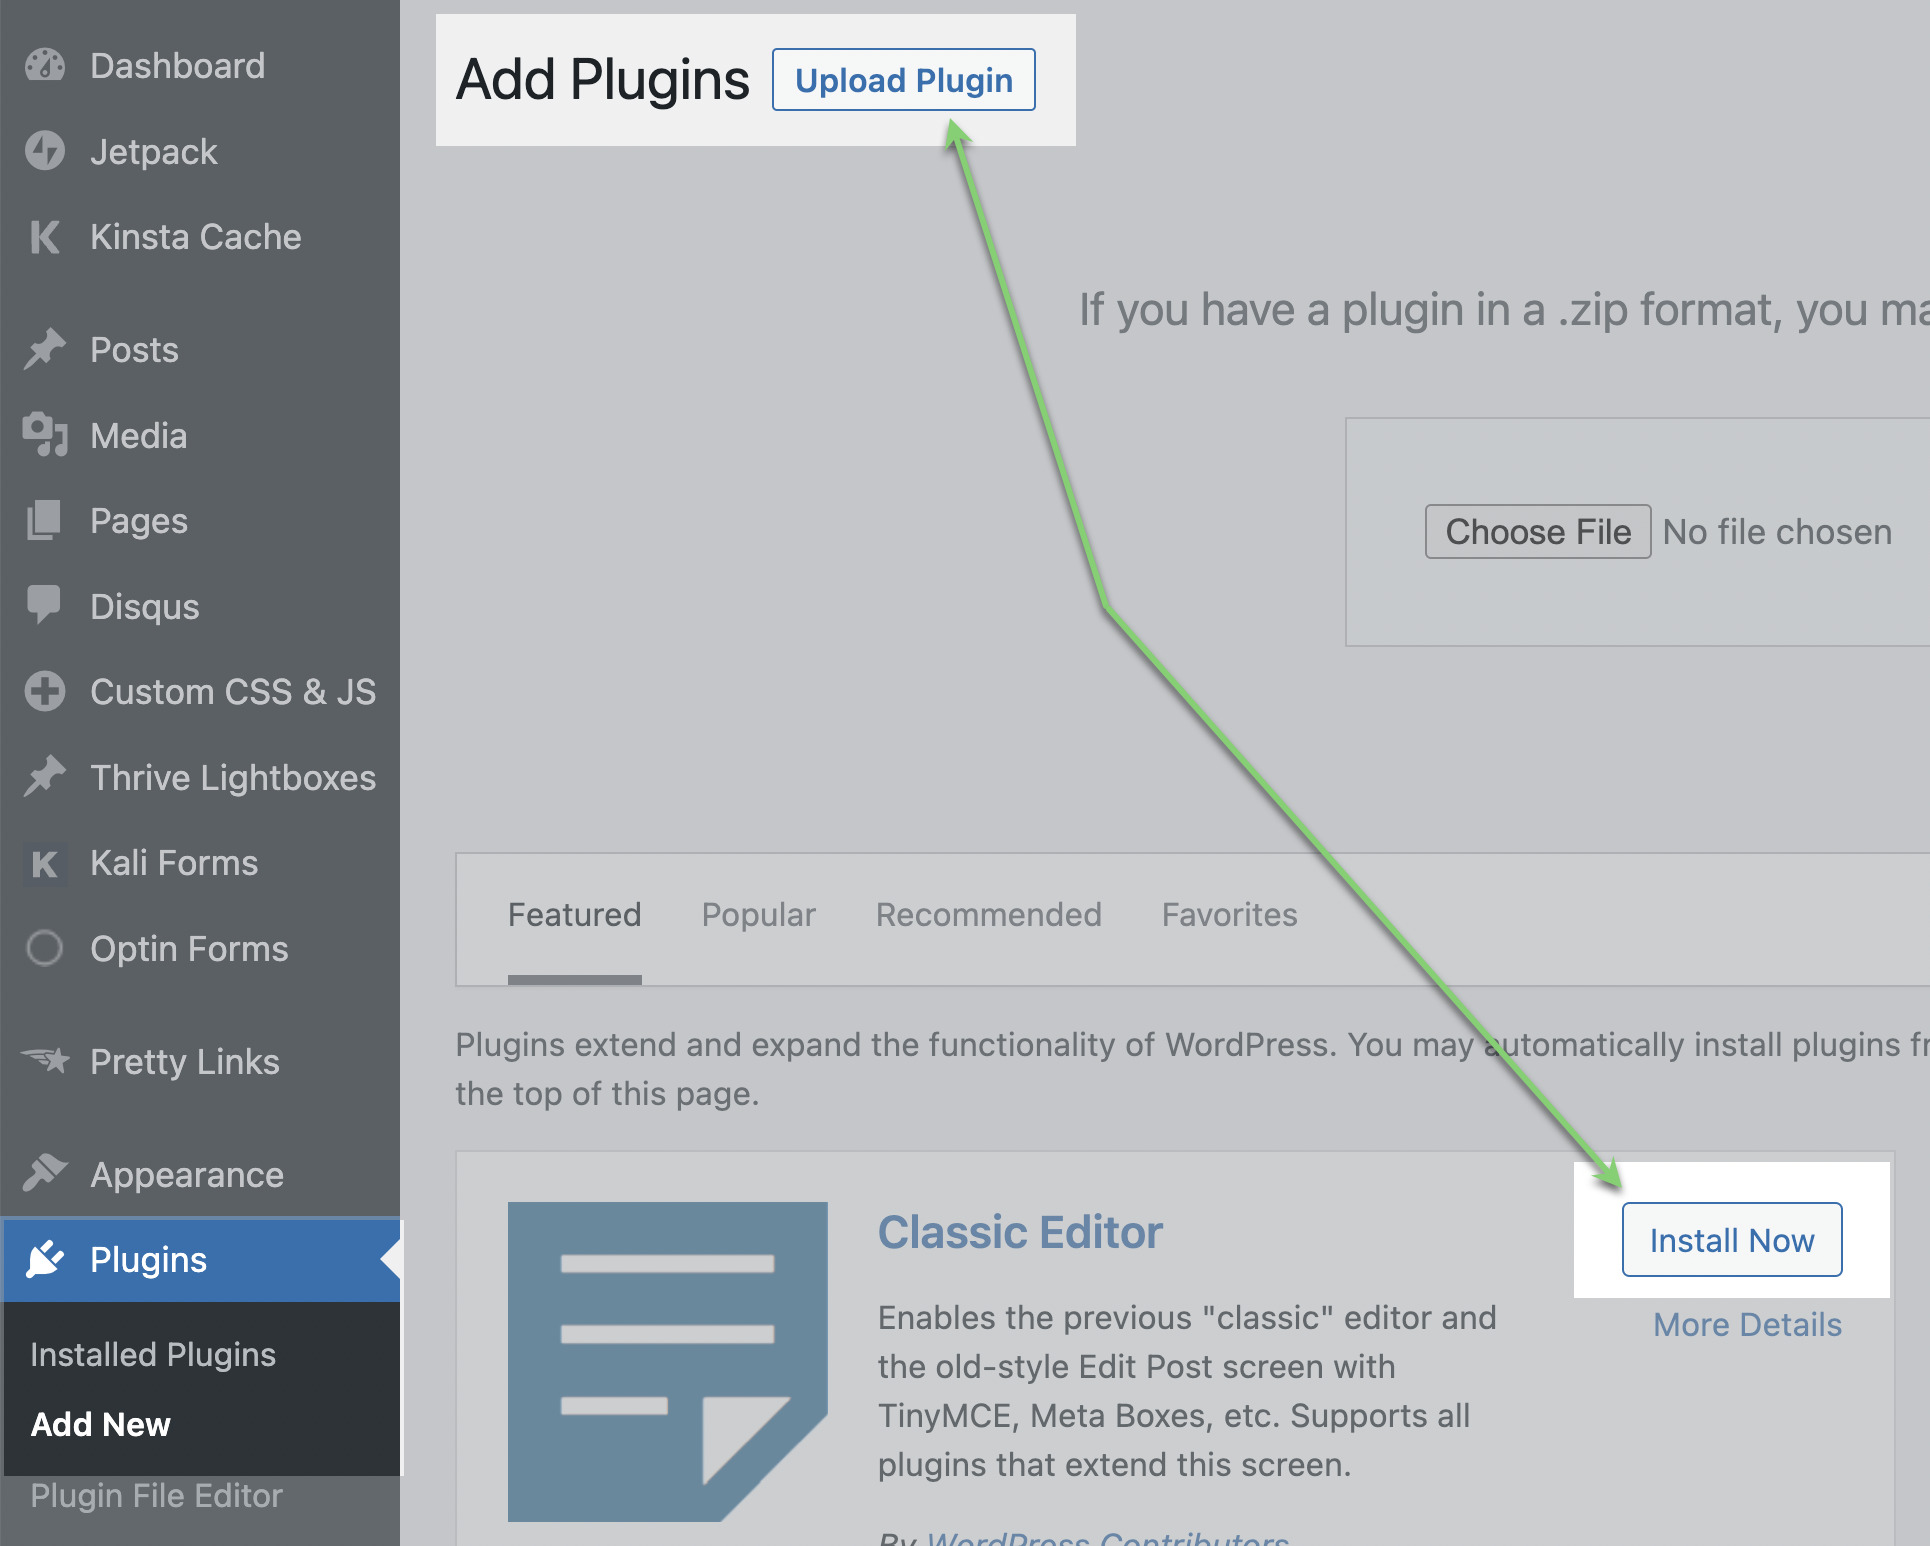 How to upload a plugin to your WordPress website